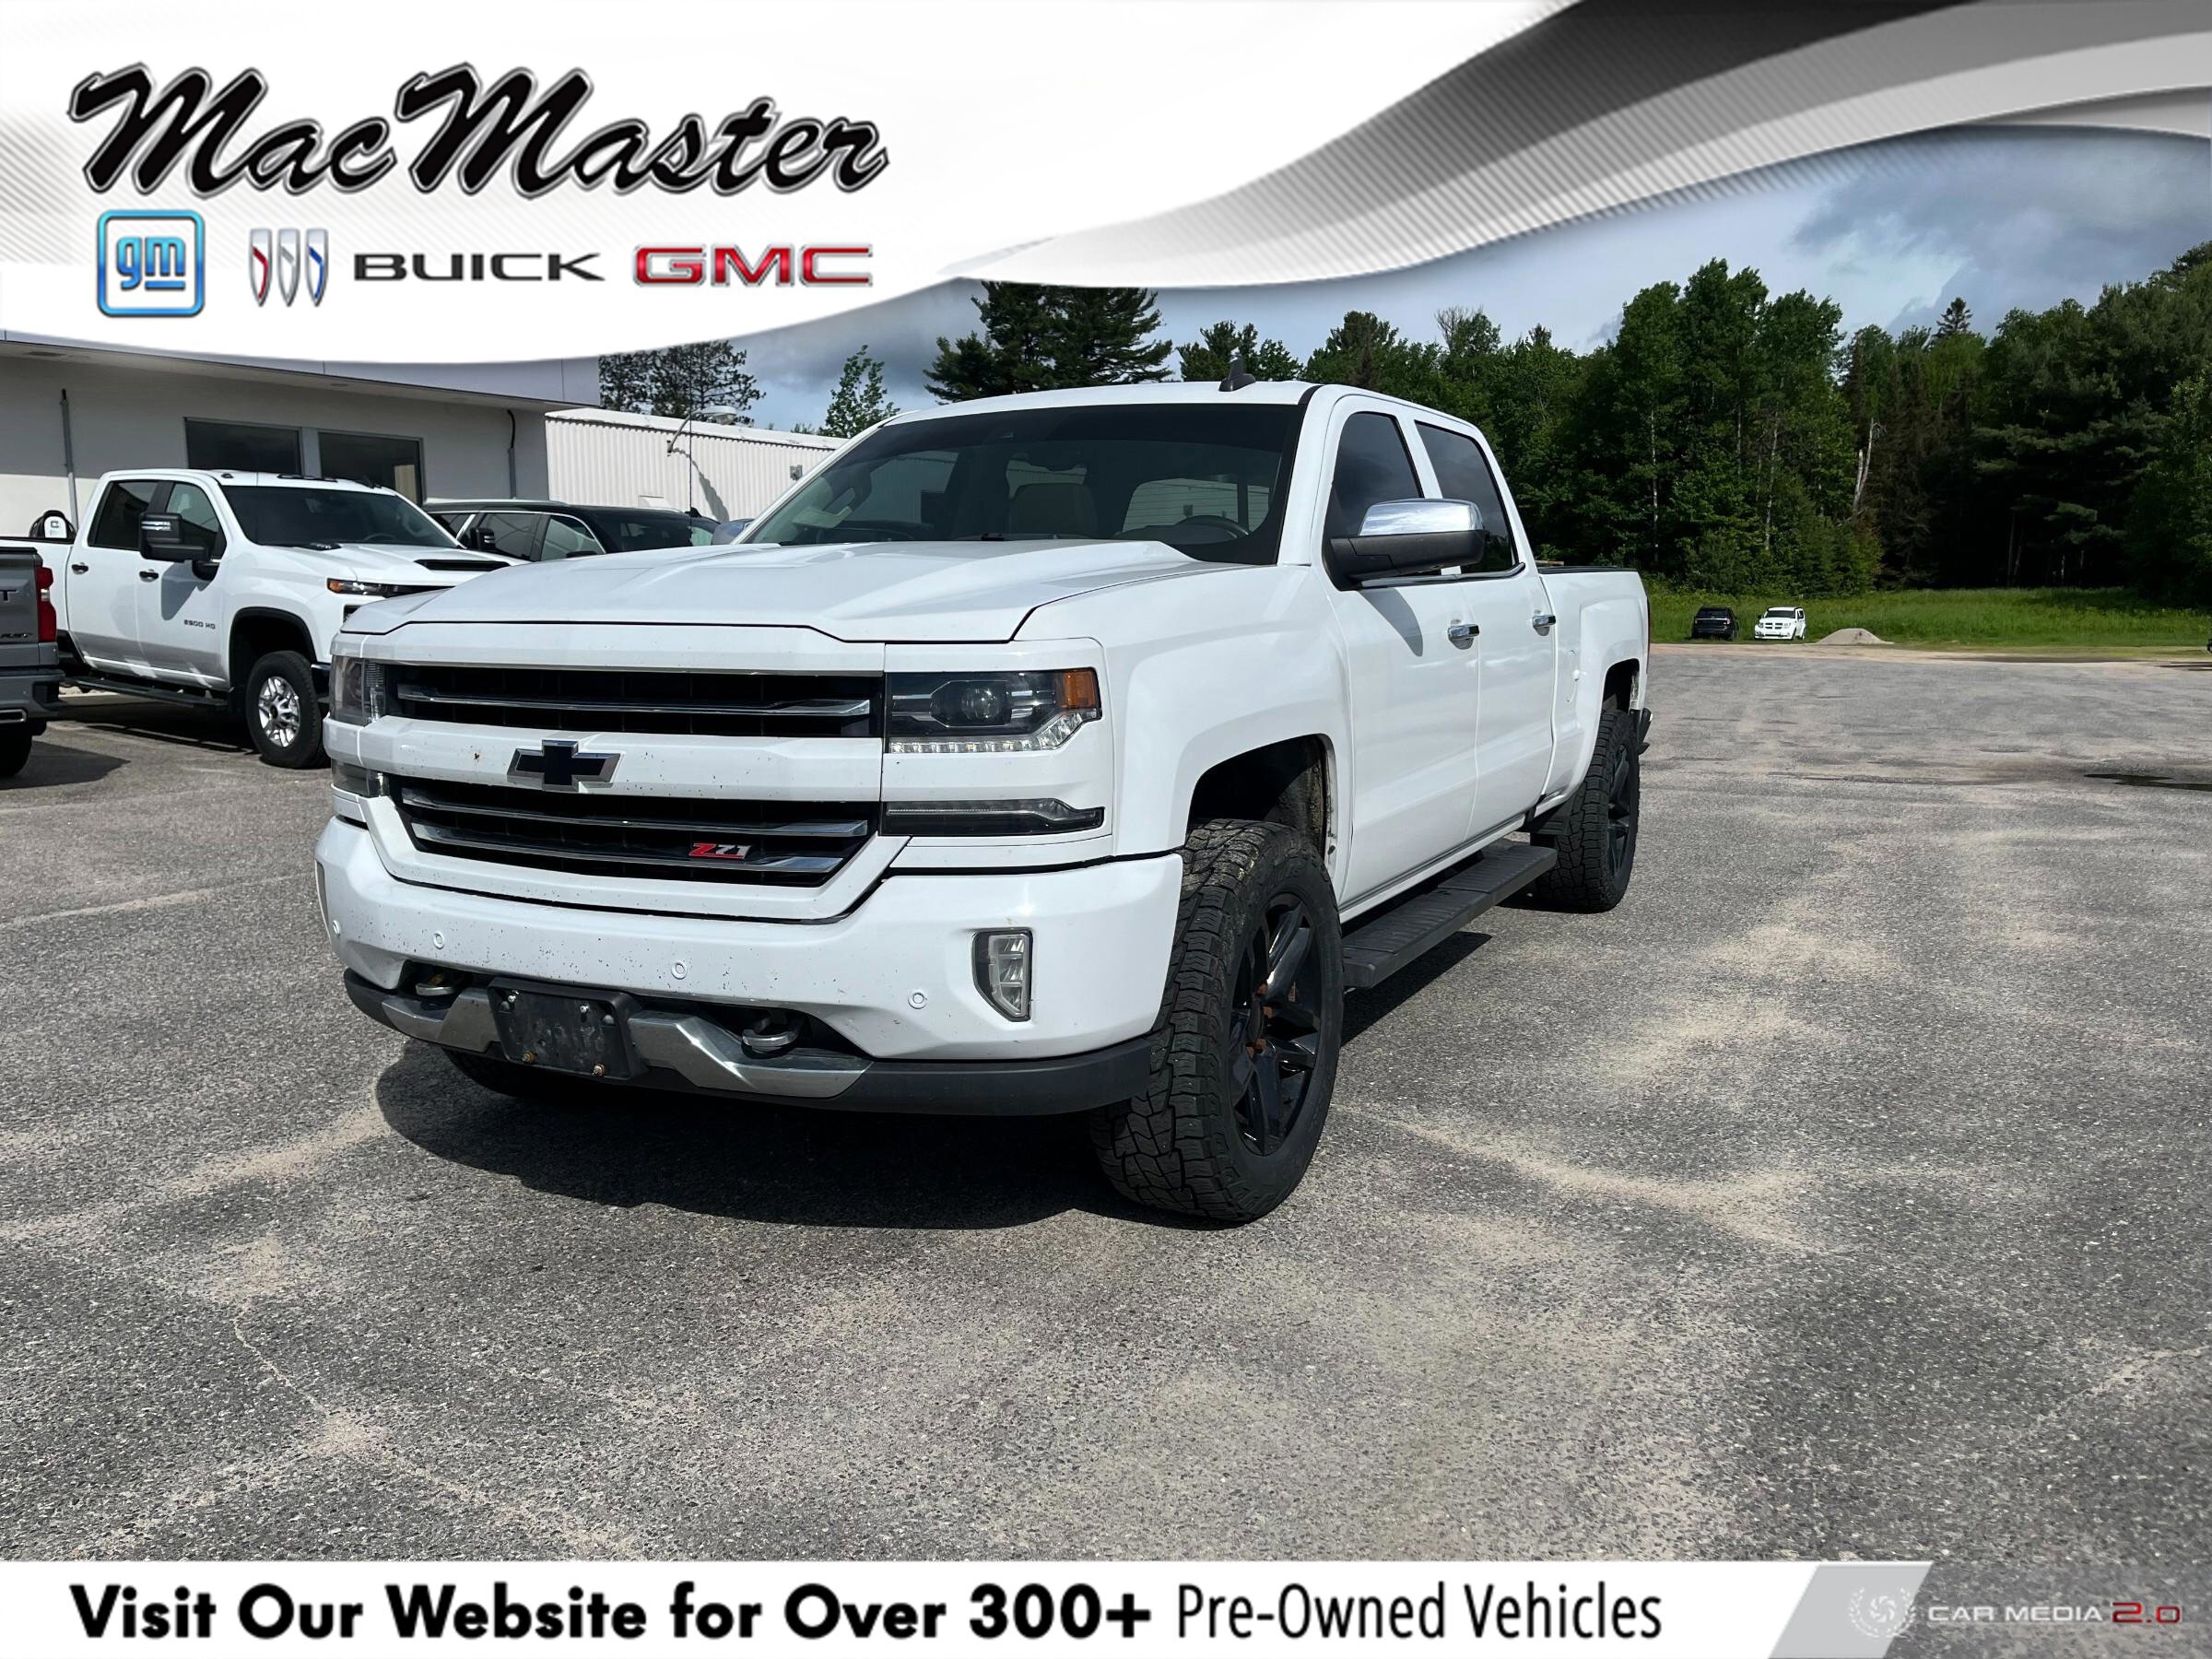 2017 Chevrolet Silverado 1500 LTZ CERTIFIED PREOWNED WITH A CLEAN CARFAX REPORT!